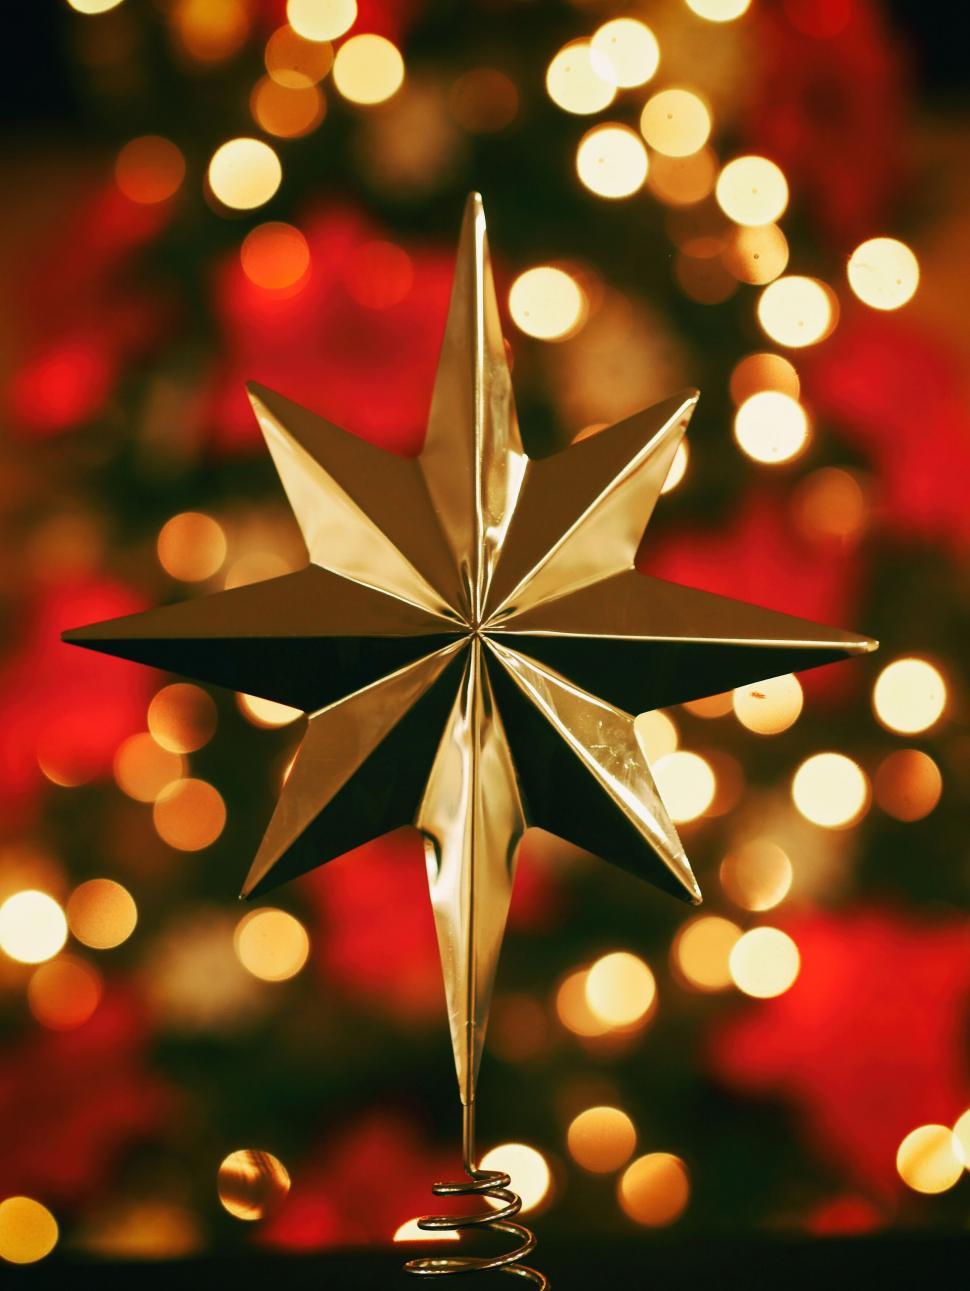 Free Image of A gold star on a tree 